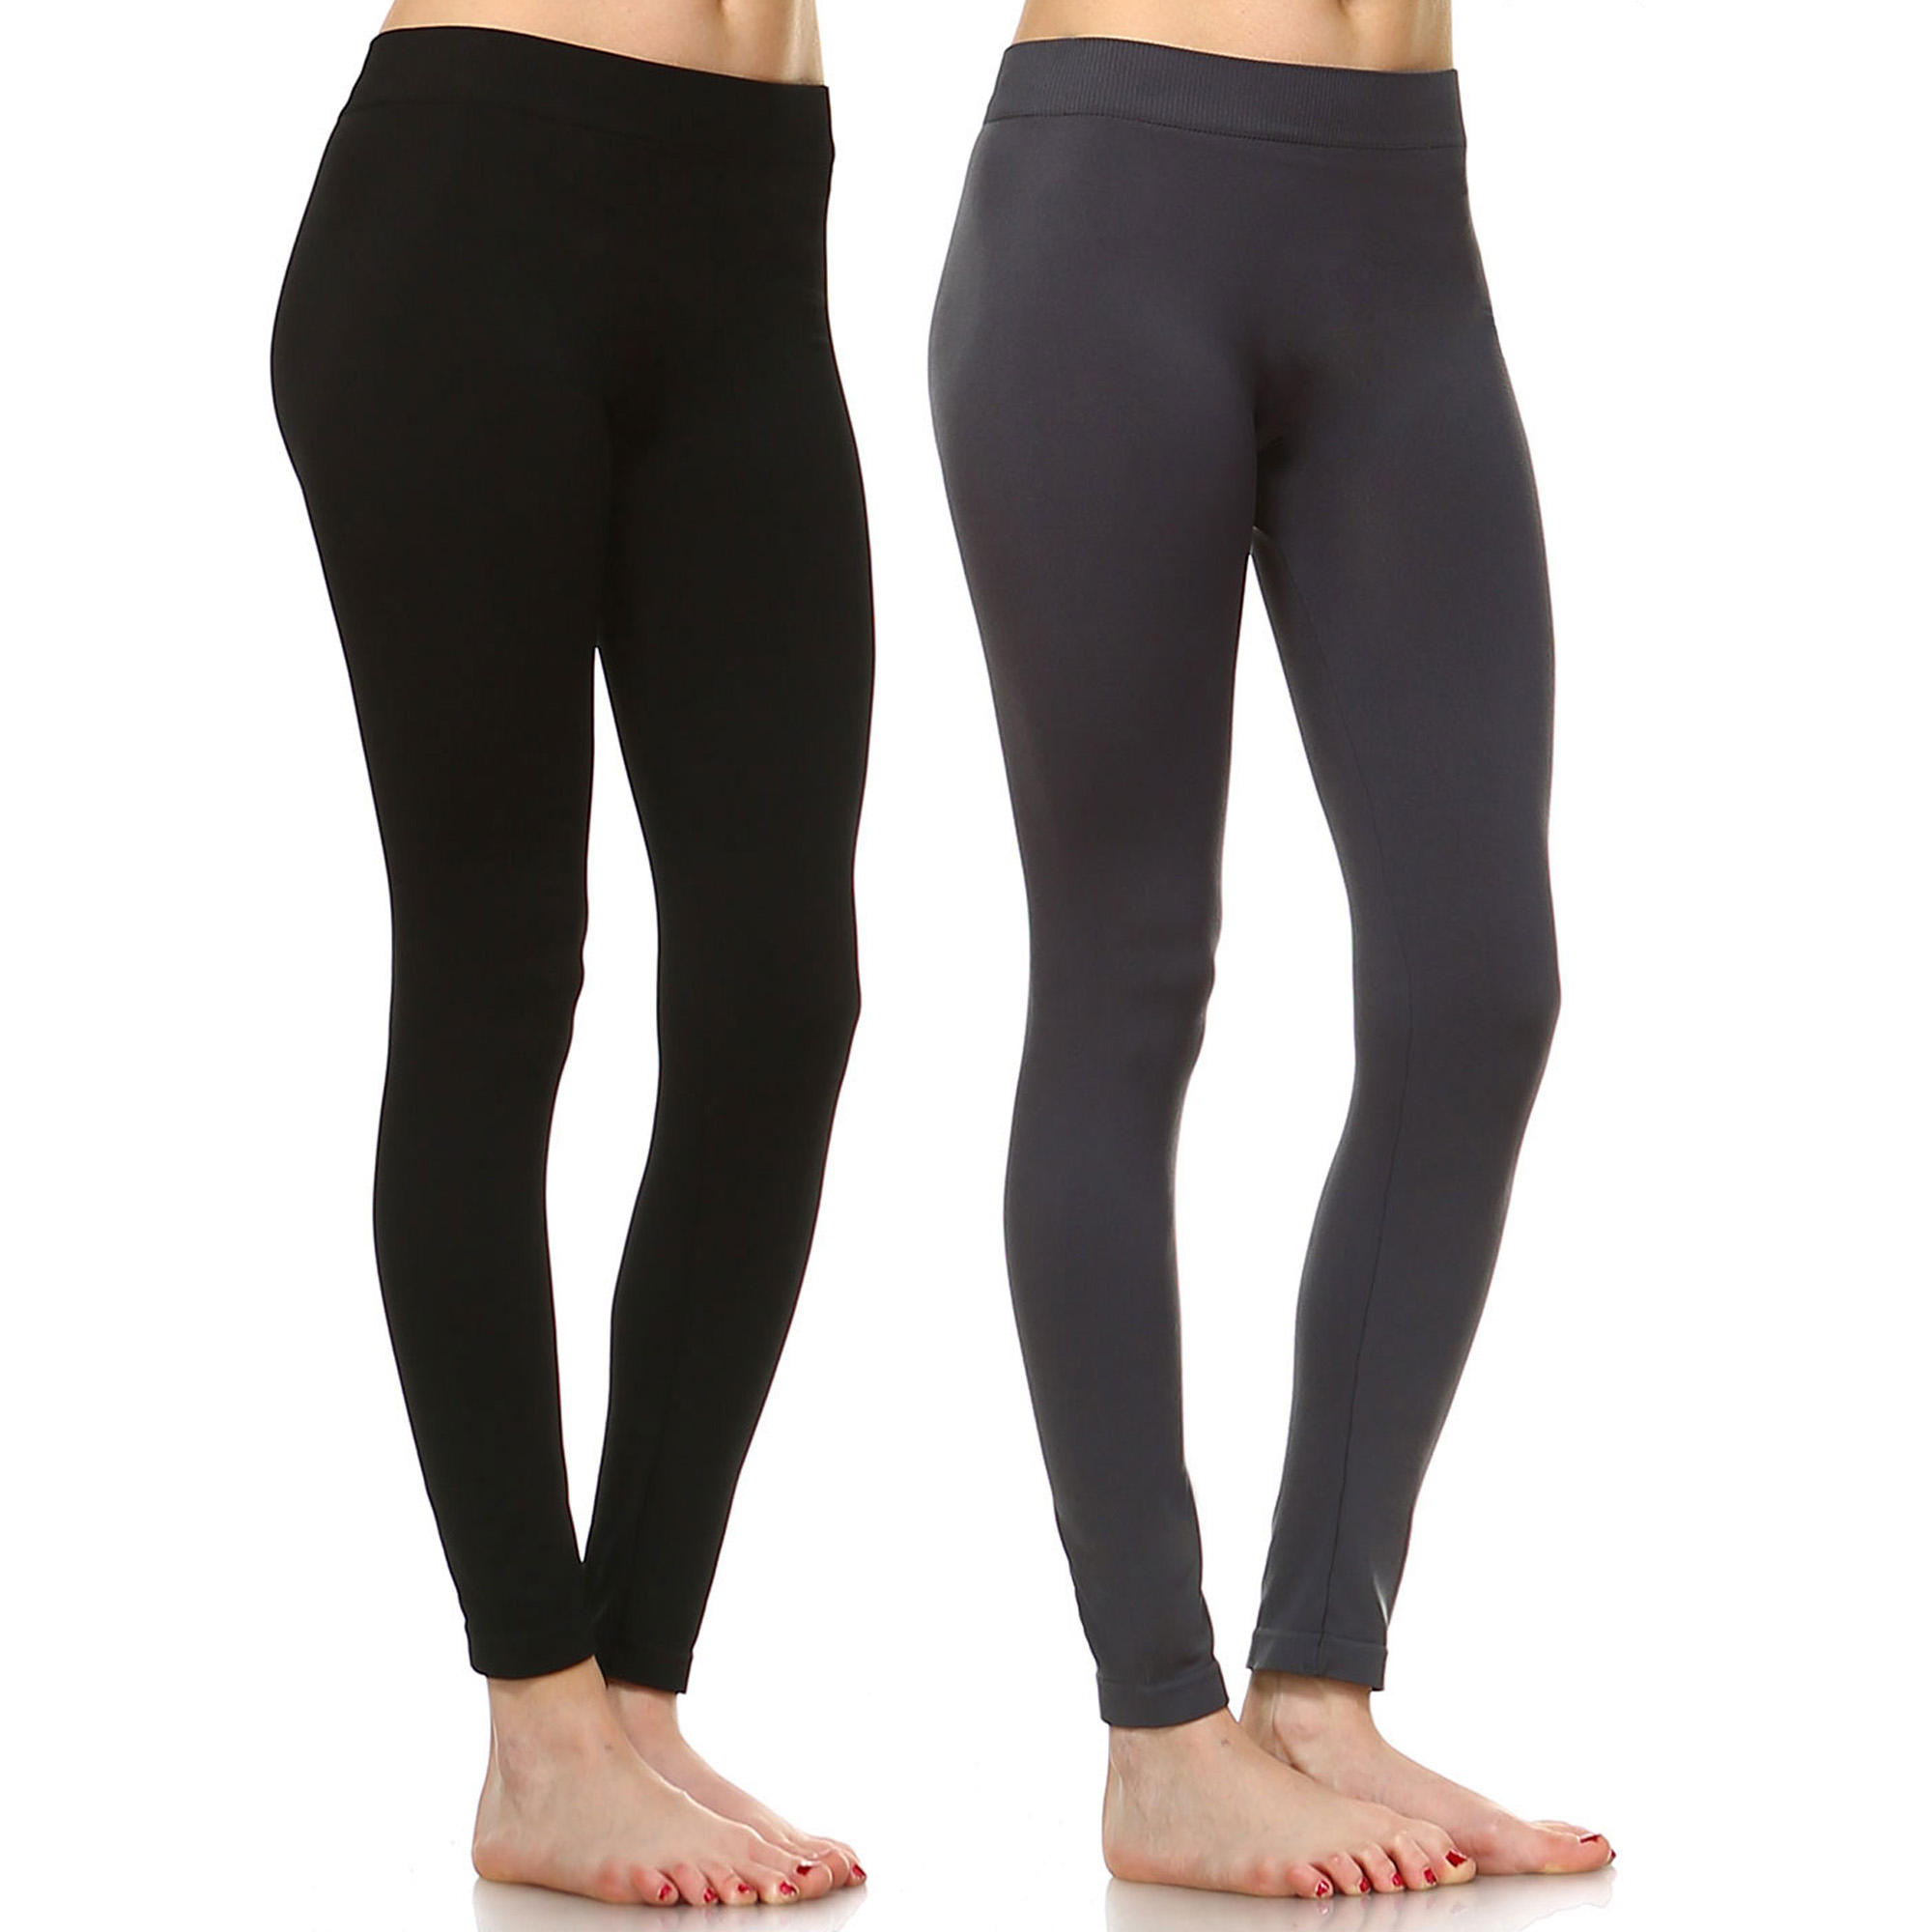 White Mark Women's Pack Of 2 Solid Color Leggings - Black, Charcoal., One Size - Missy